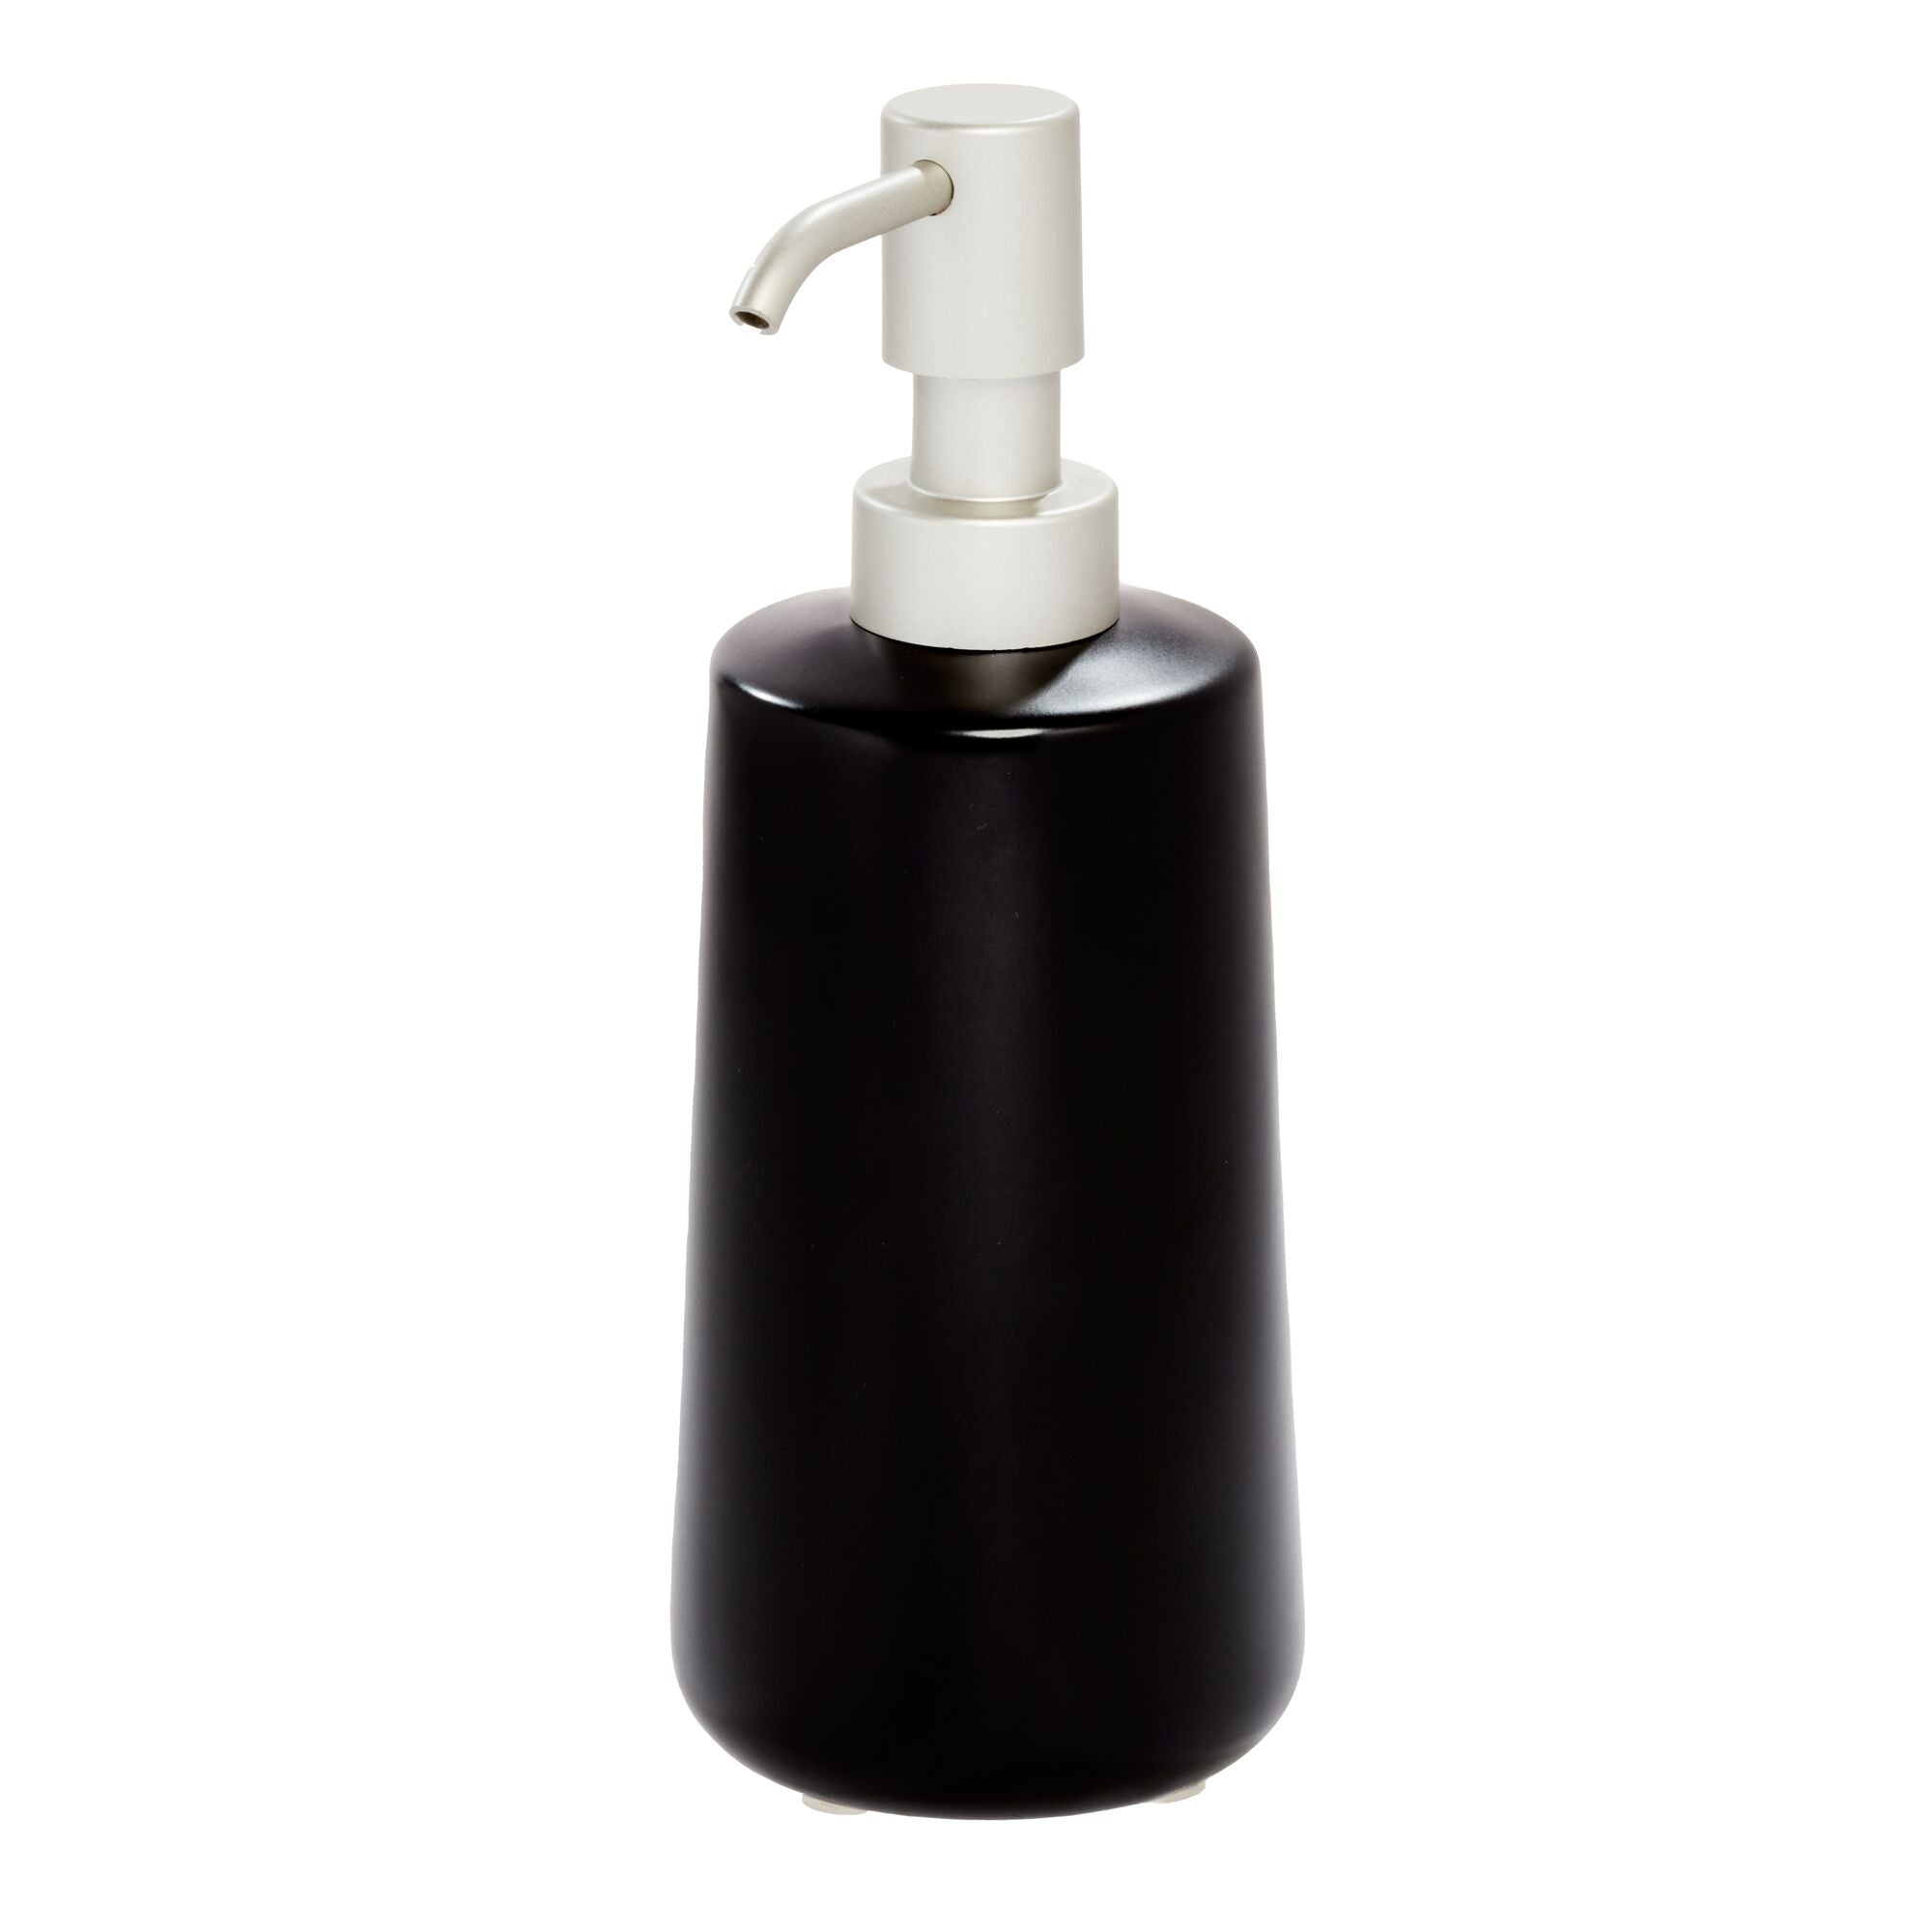 Black Sink Tidy Caddy Organiser with Lotion Dispenser / Soap Pump